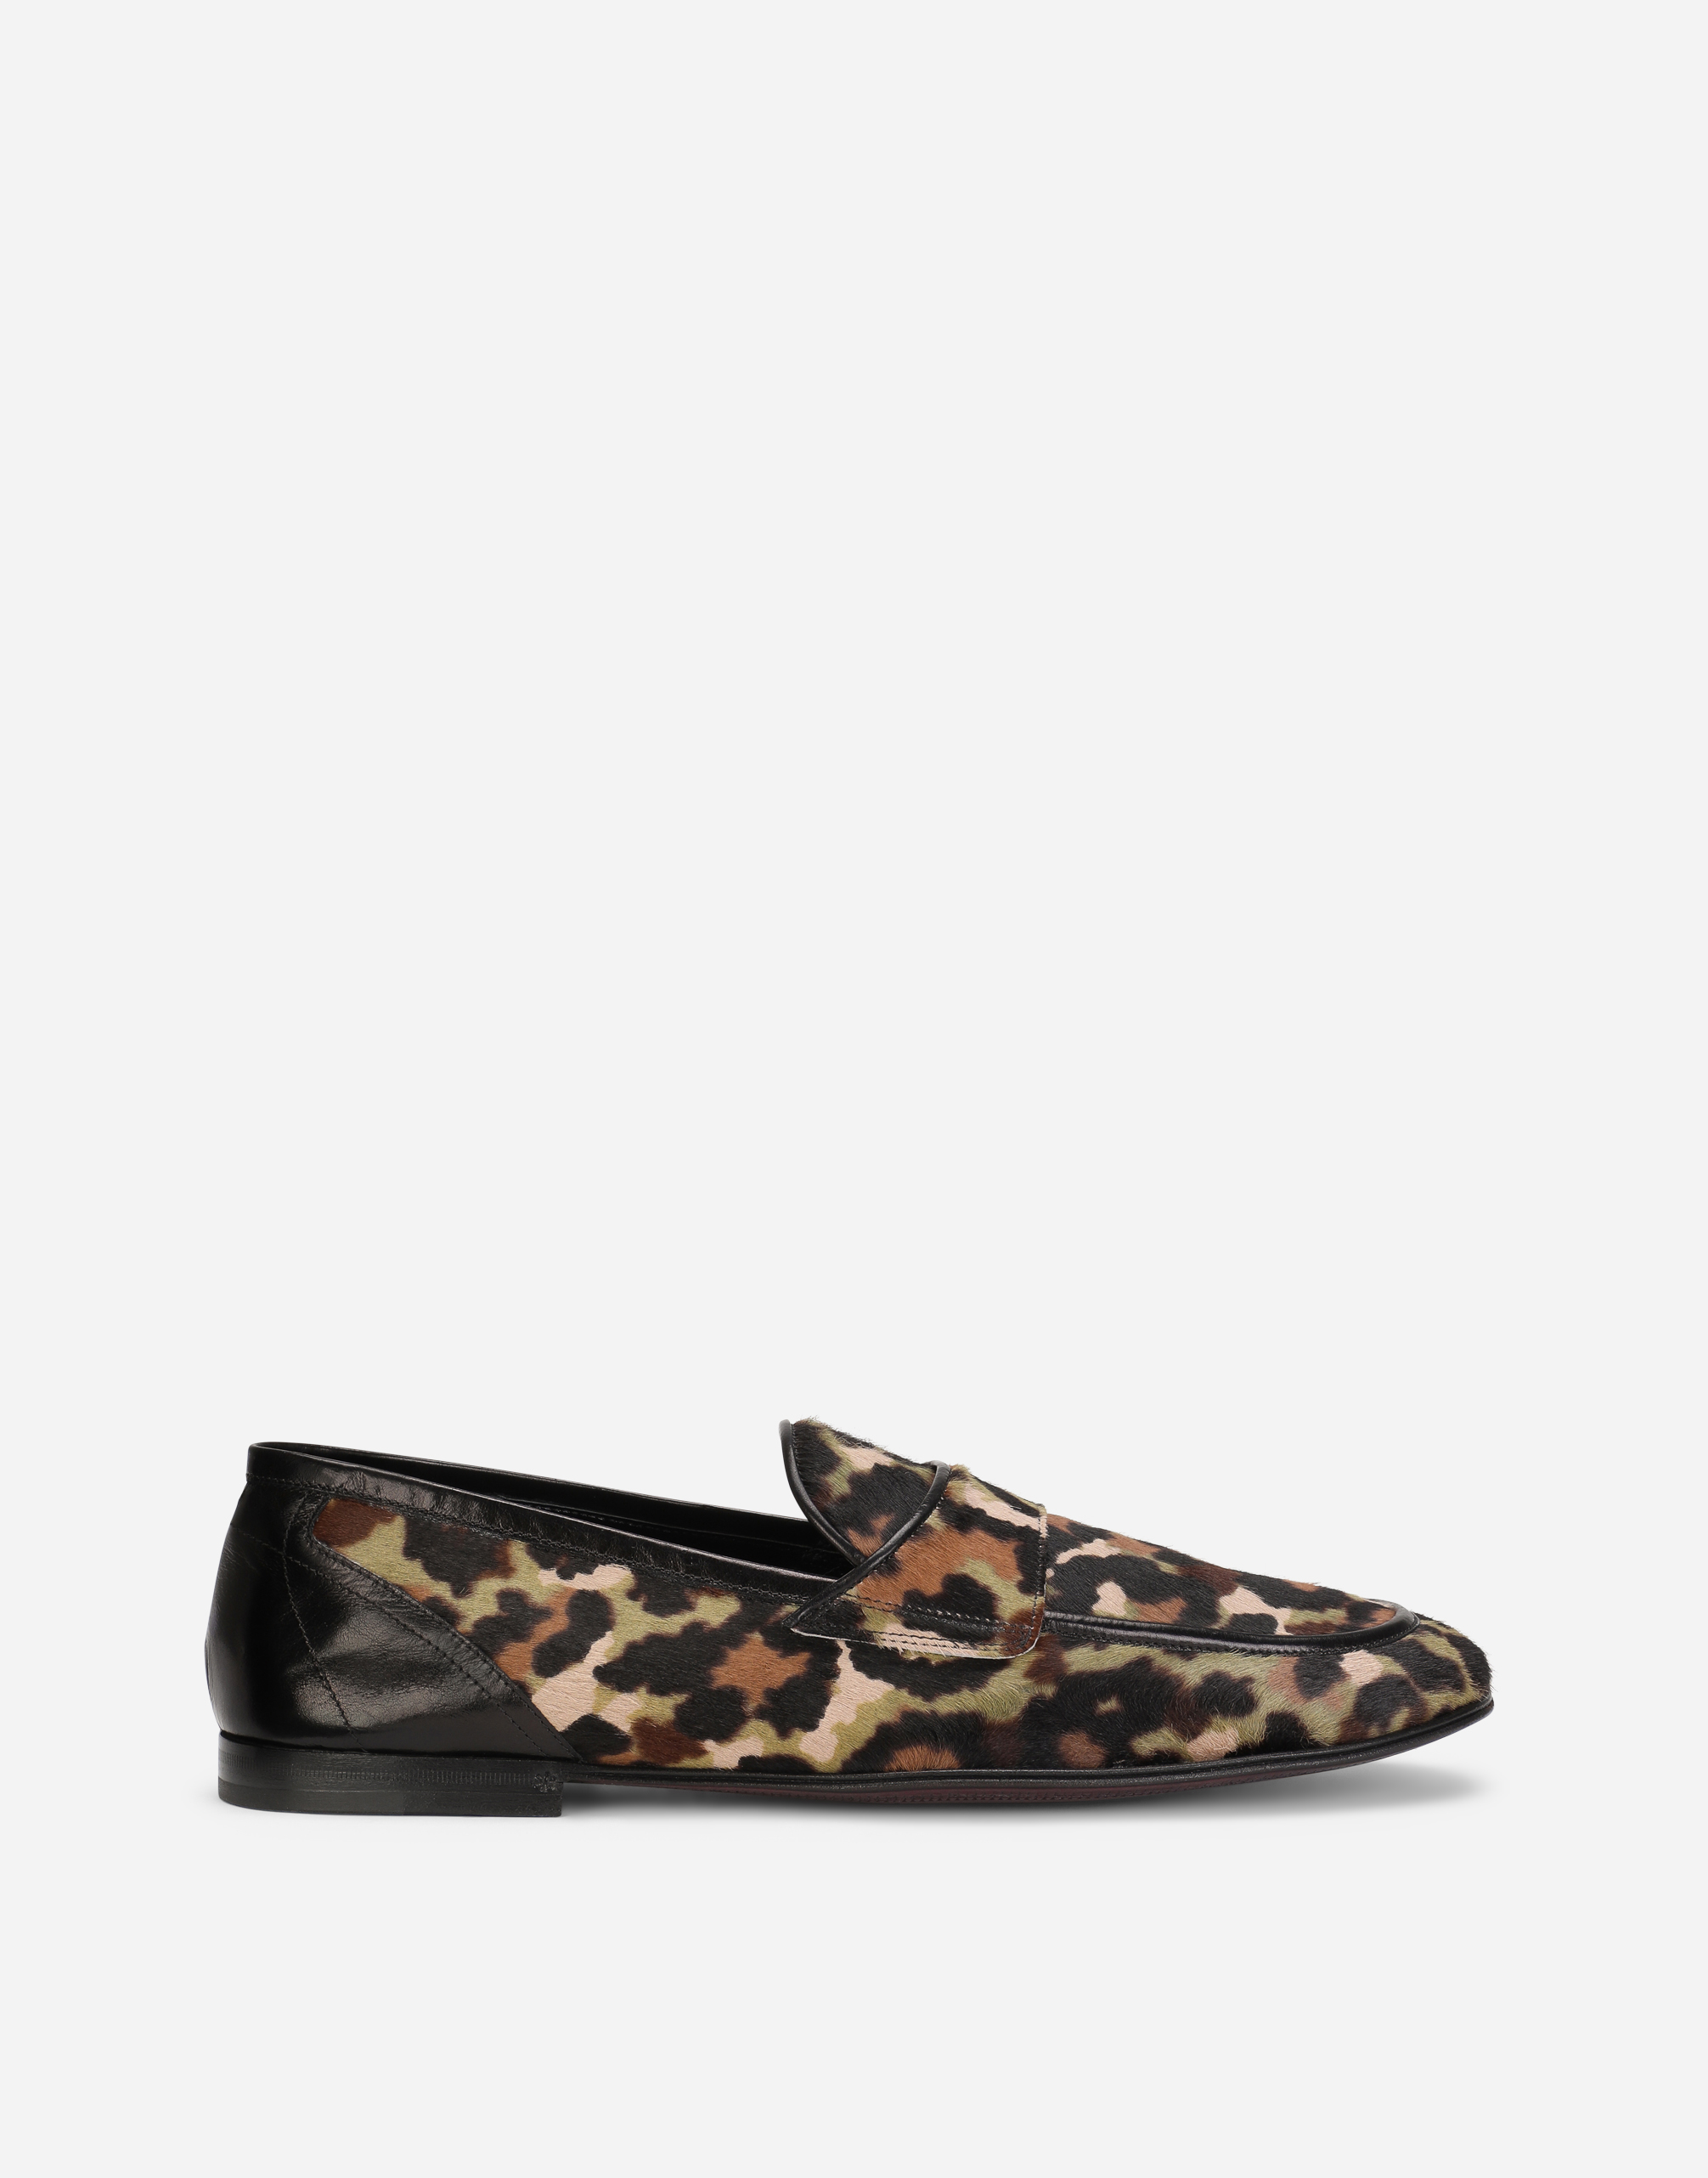 Pony hair slippers with leopard and camouflage print in Multicolor